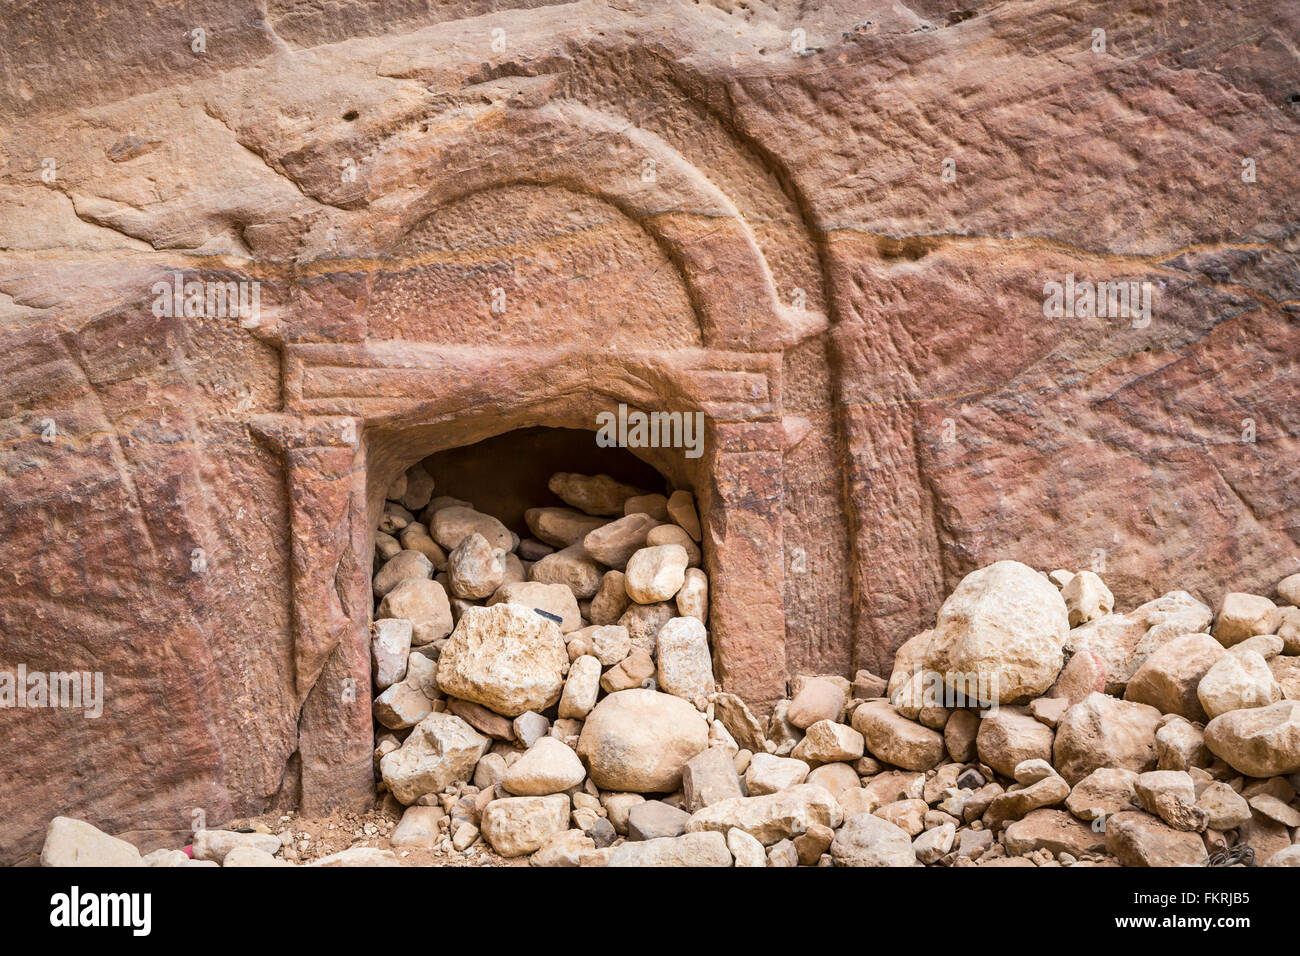 A small cave opening in the narrow siq passage entrance to Petra, Hashemite Kingdom of Jordan. Stock Photo